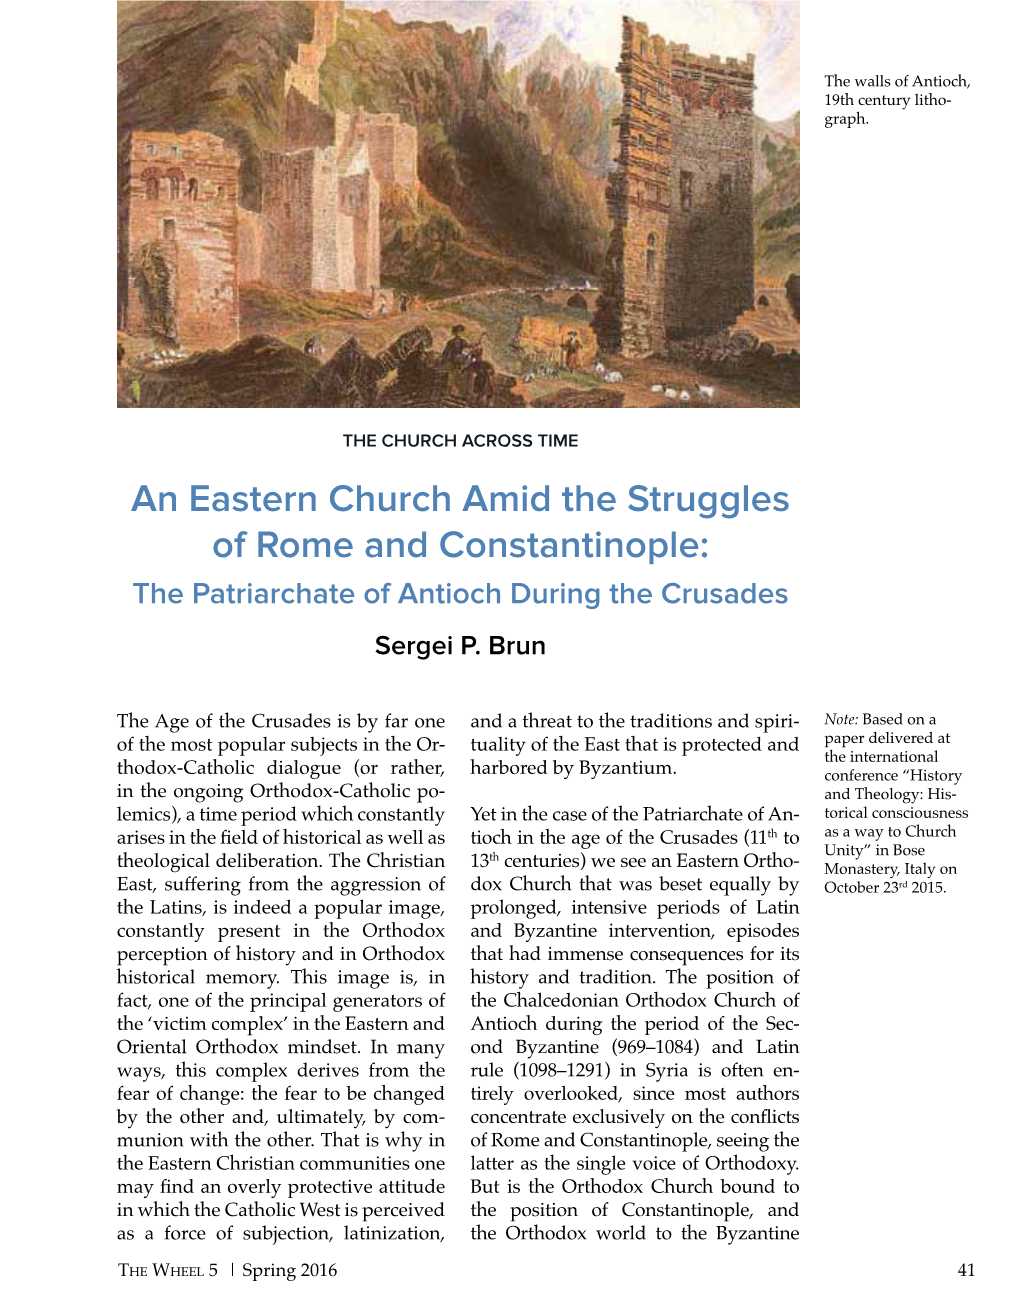 An Eastern Church Amid the Struggles of Rome and Constantinople: the Patriarchate of Antioch During the Crusades Sergei P